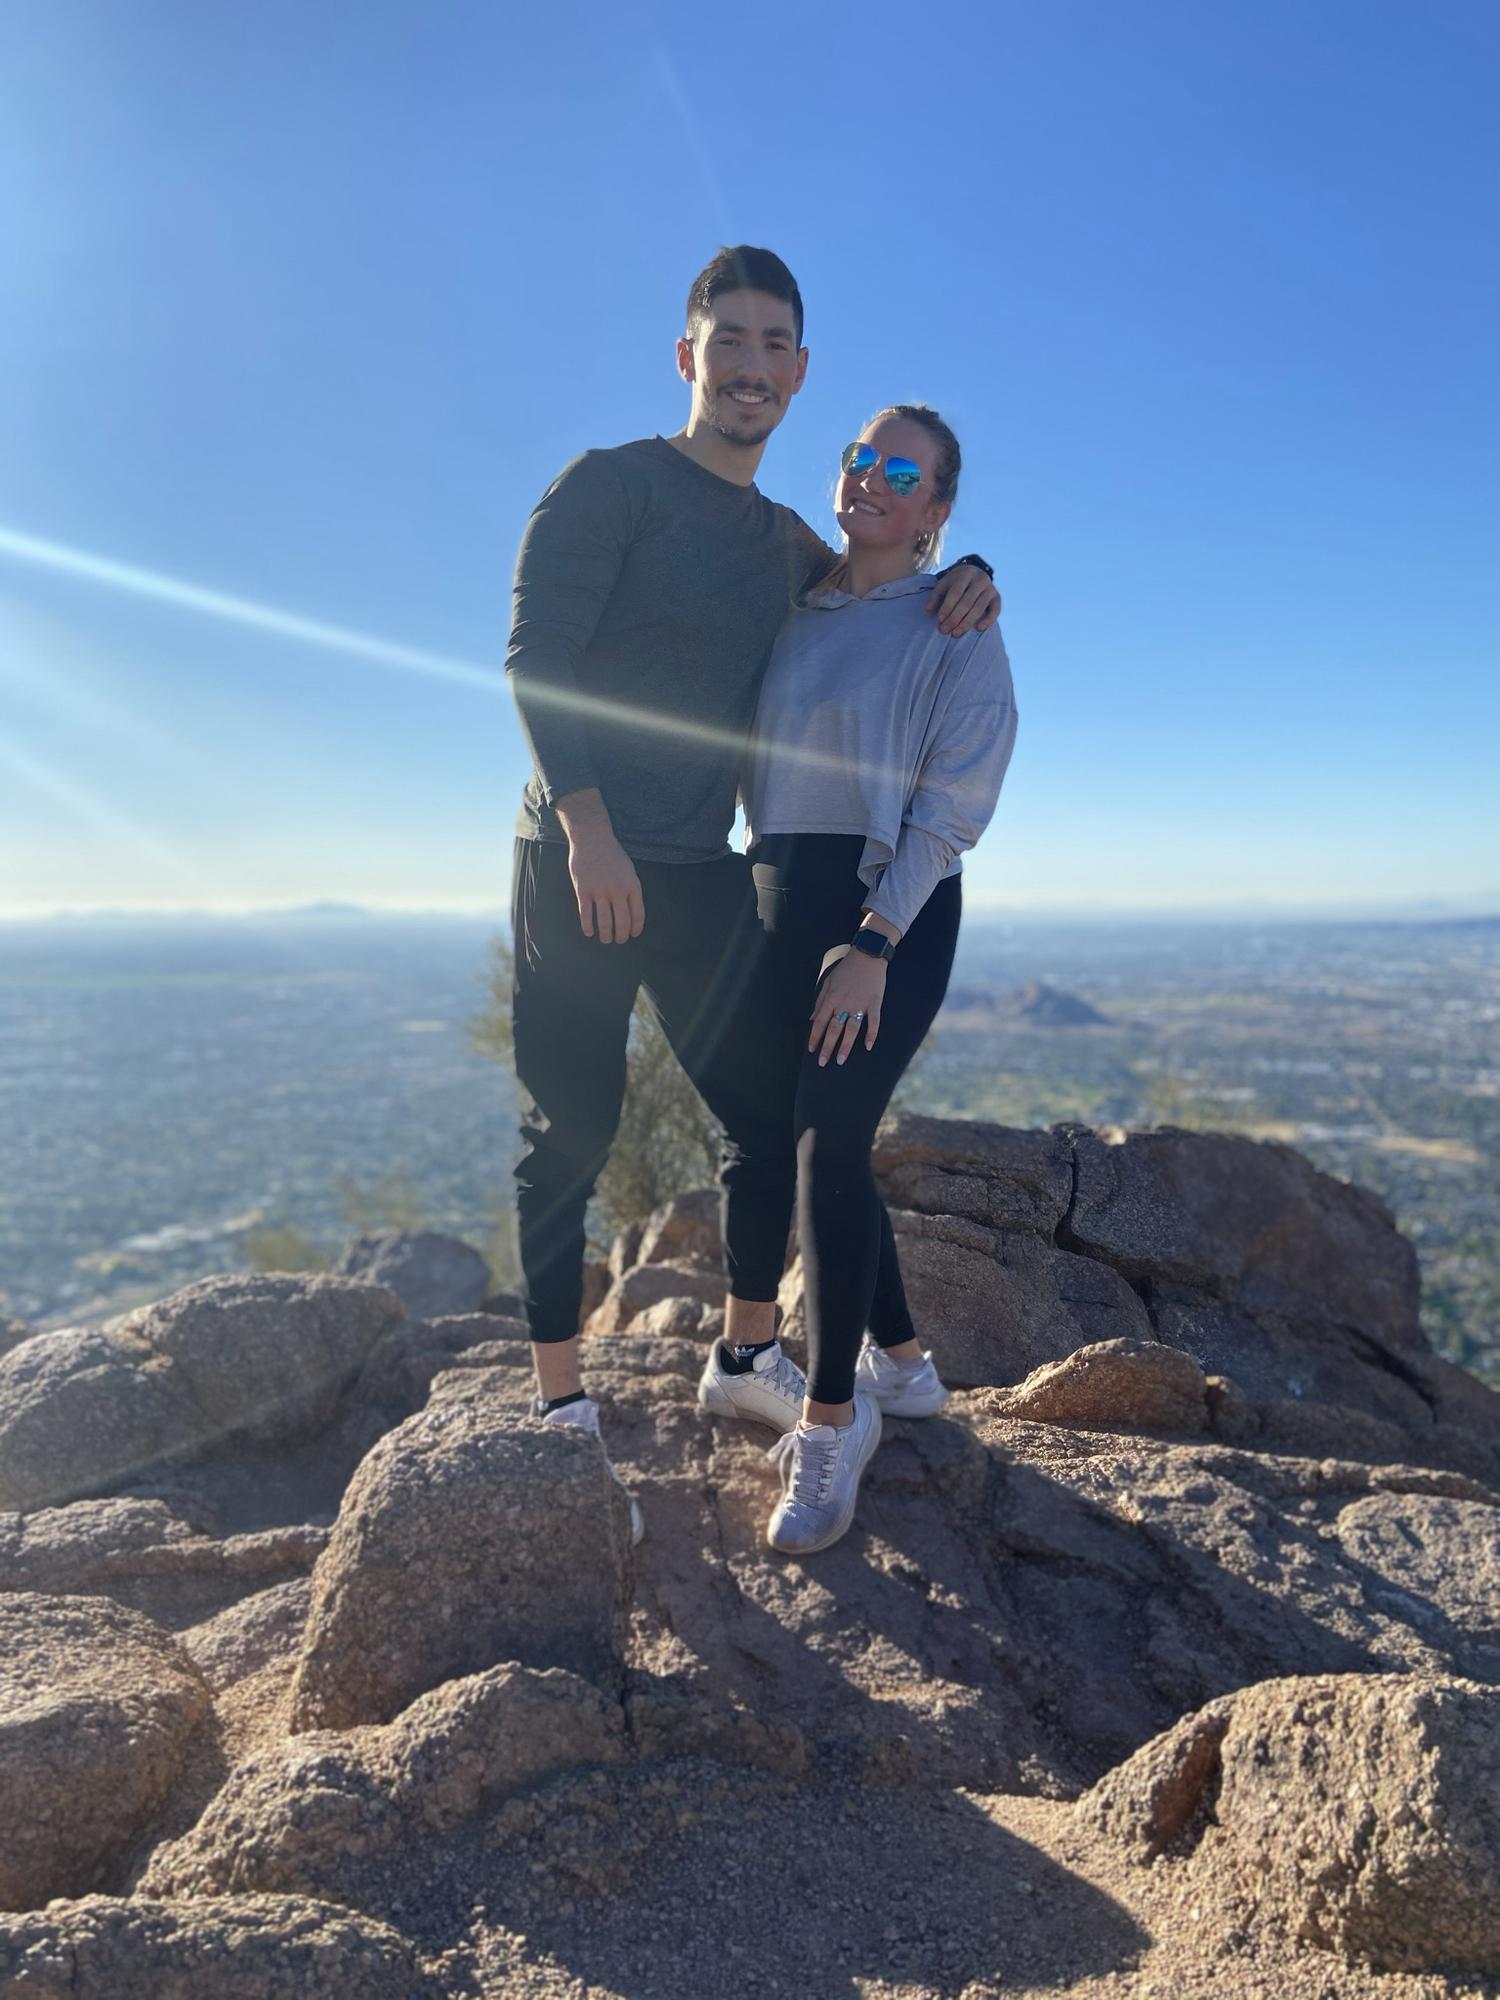 This photo was captured in 2021 when Mary and Grant hiked up Camelback Mountain in AZ.